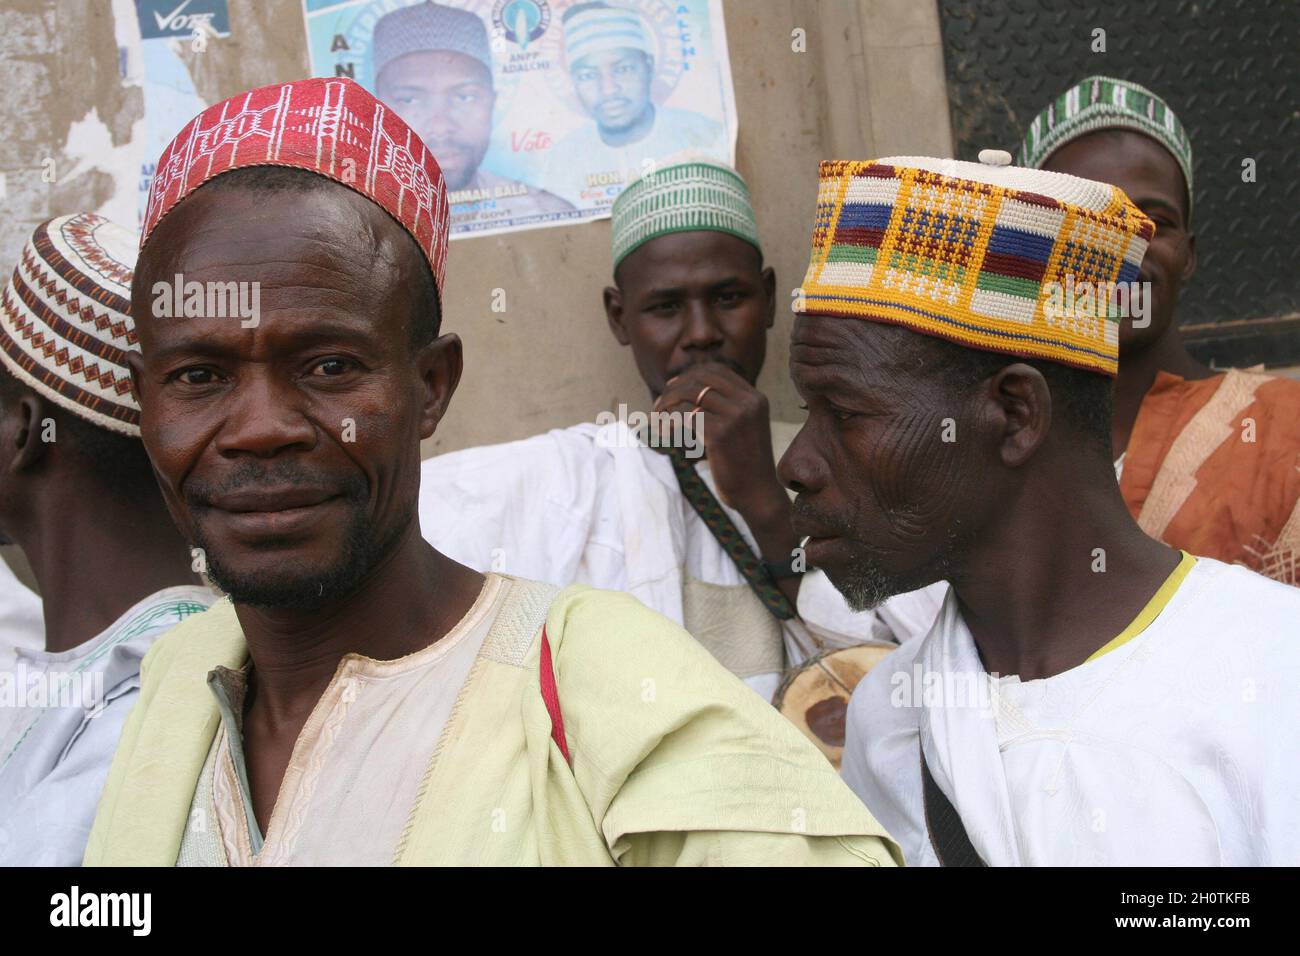 Men living in Shinkafi, a town in Zamfara state in northern Nigeria. Most of the people who live her are poor, living below US$1 a day. Hausa is spoken as the first language of the state, which is also the first state to have introduced Muslim sharia law. "Farming is our pride" is the slogan of the state, which is largely agricultural. Shinkafi, Zamfara, Nigeria. April 12, 2008. Stock Photo